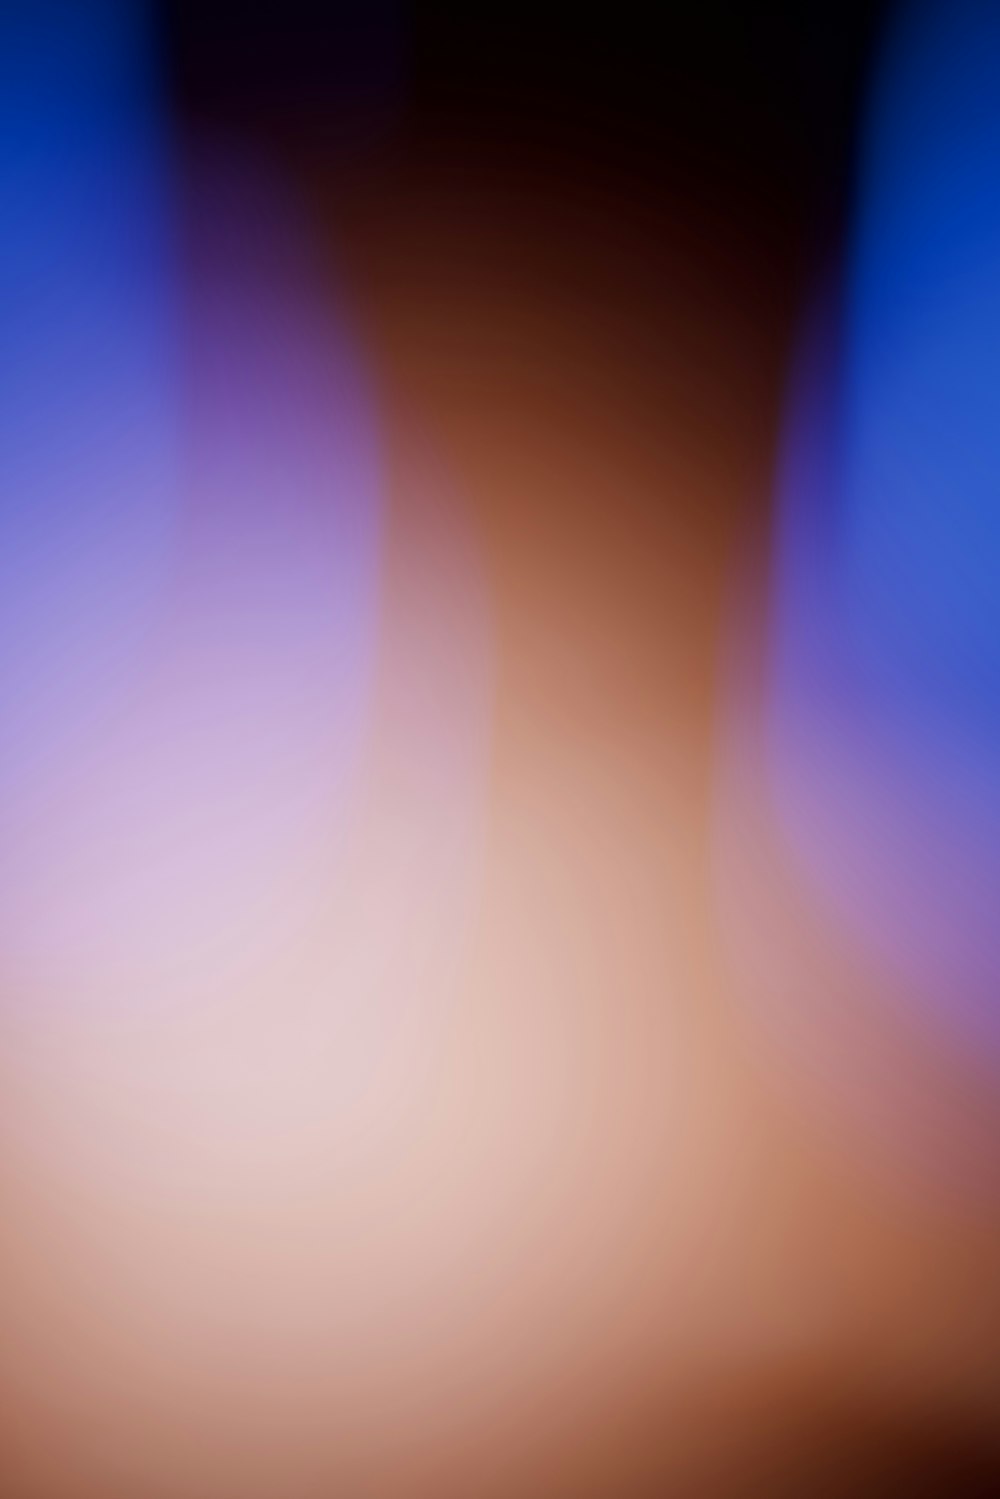 a blurry image of a blue and brown background